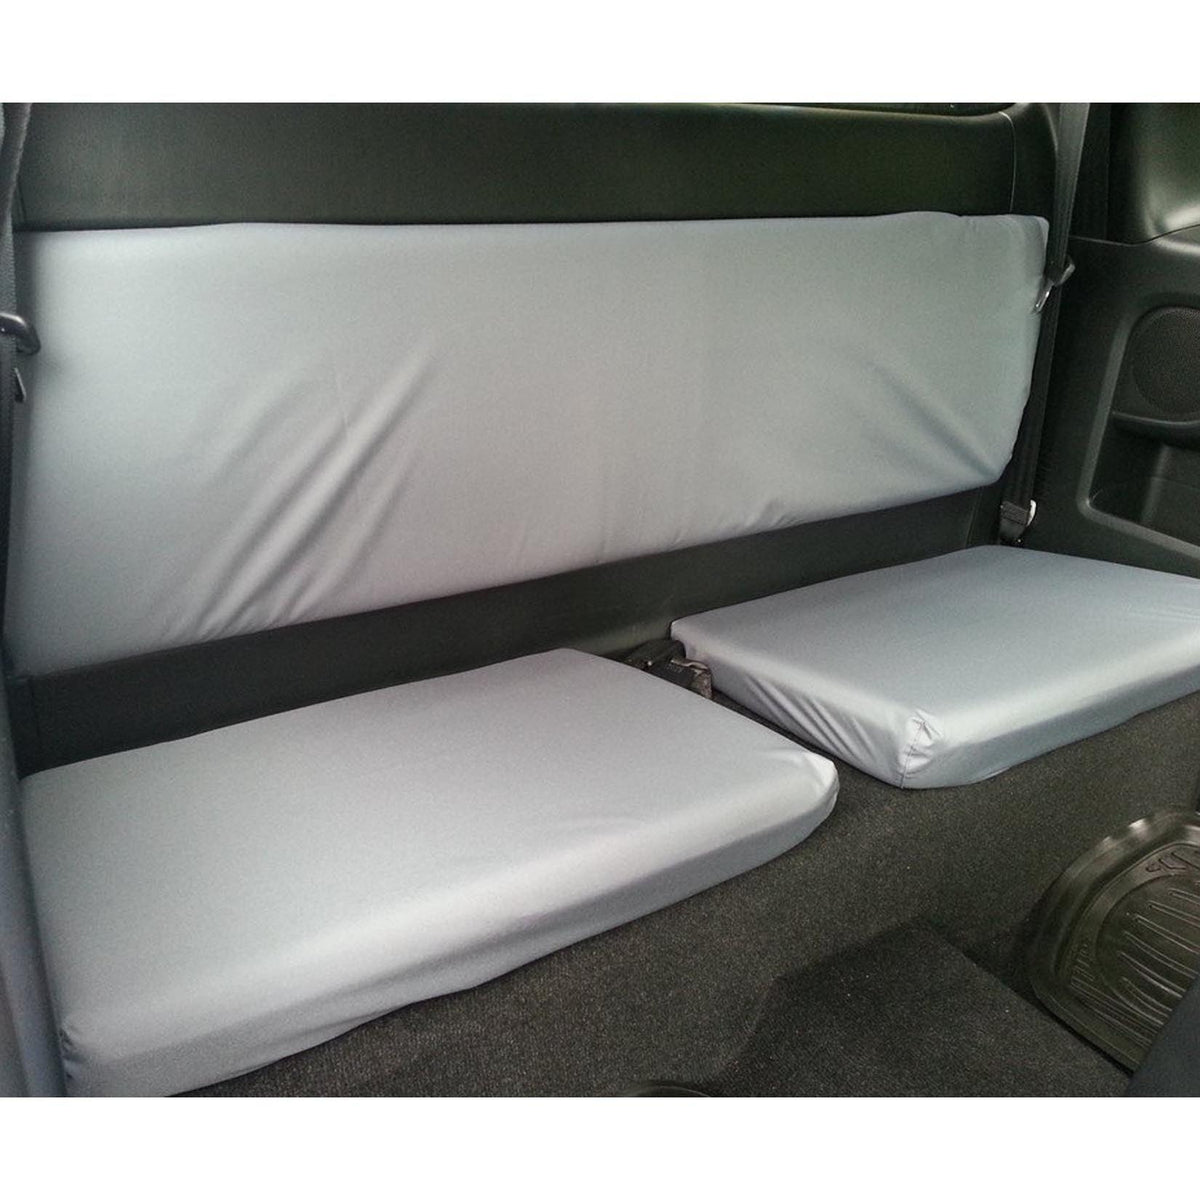 TOYOTA HILUX 2005-2016 EXTRA CAB REAR SEAT COVERS - GREY - Storm Xccessories2